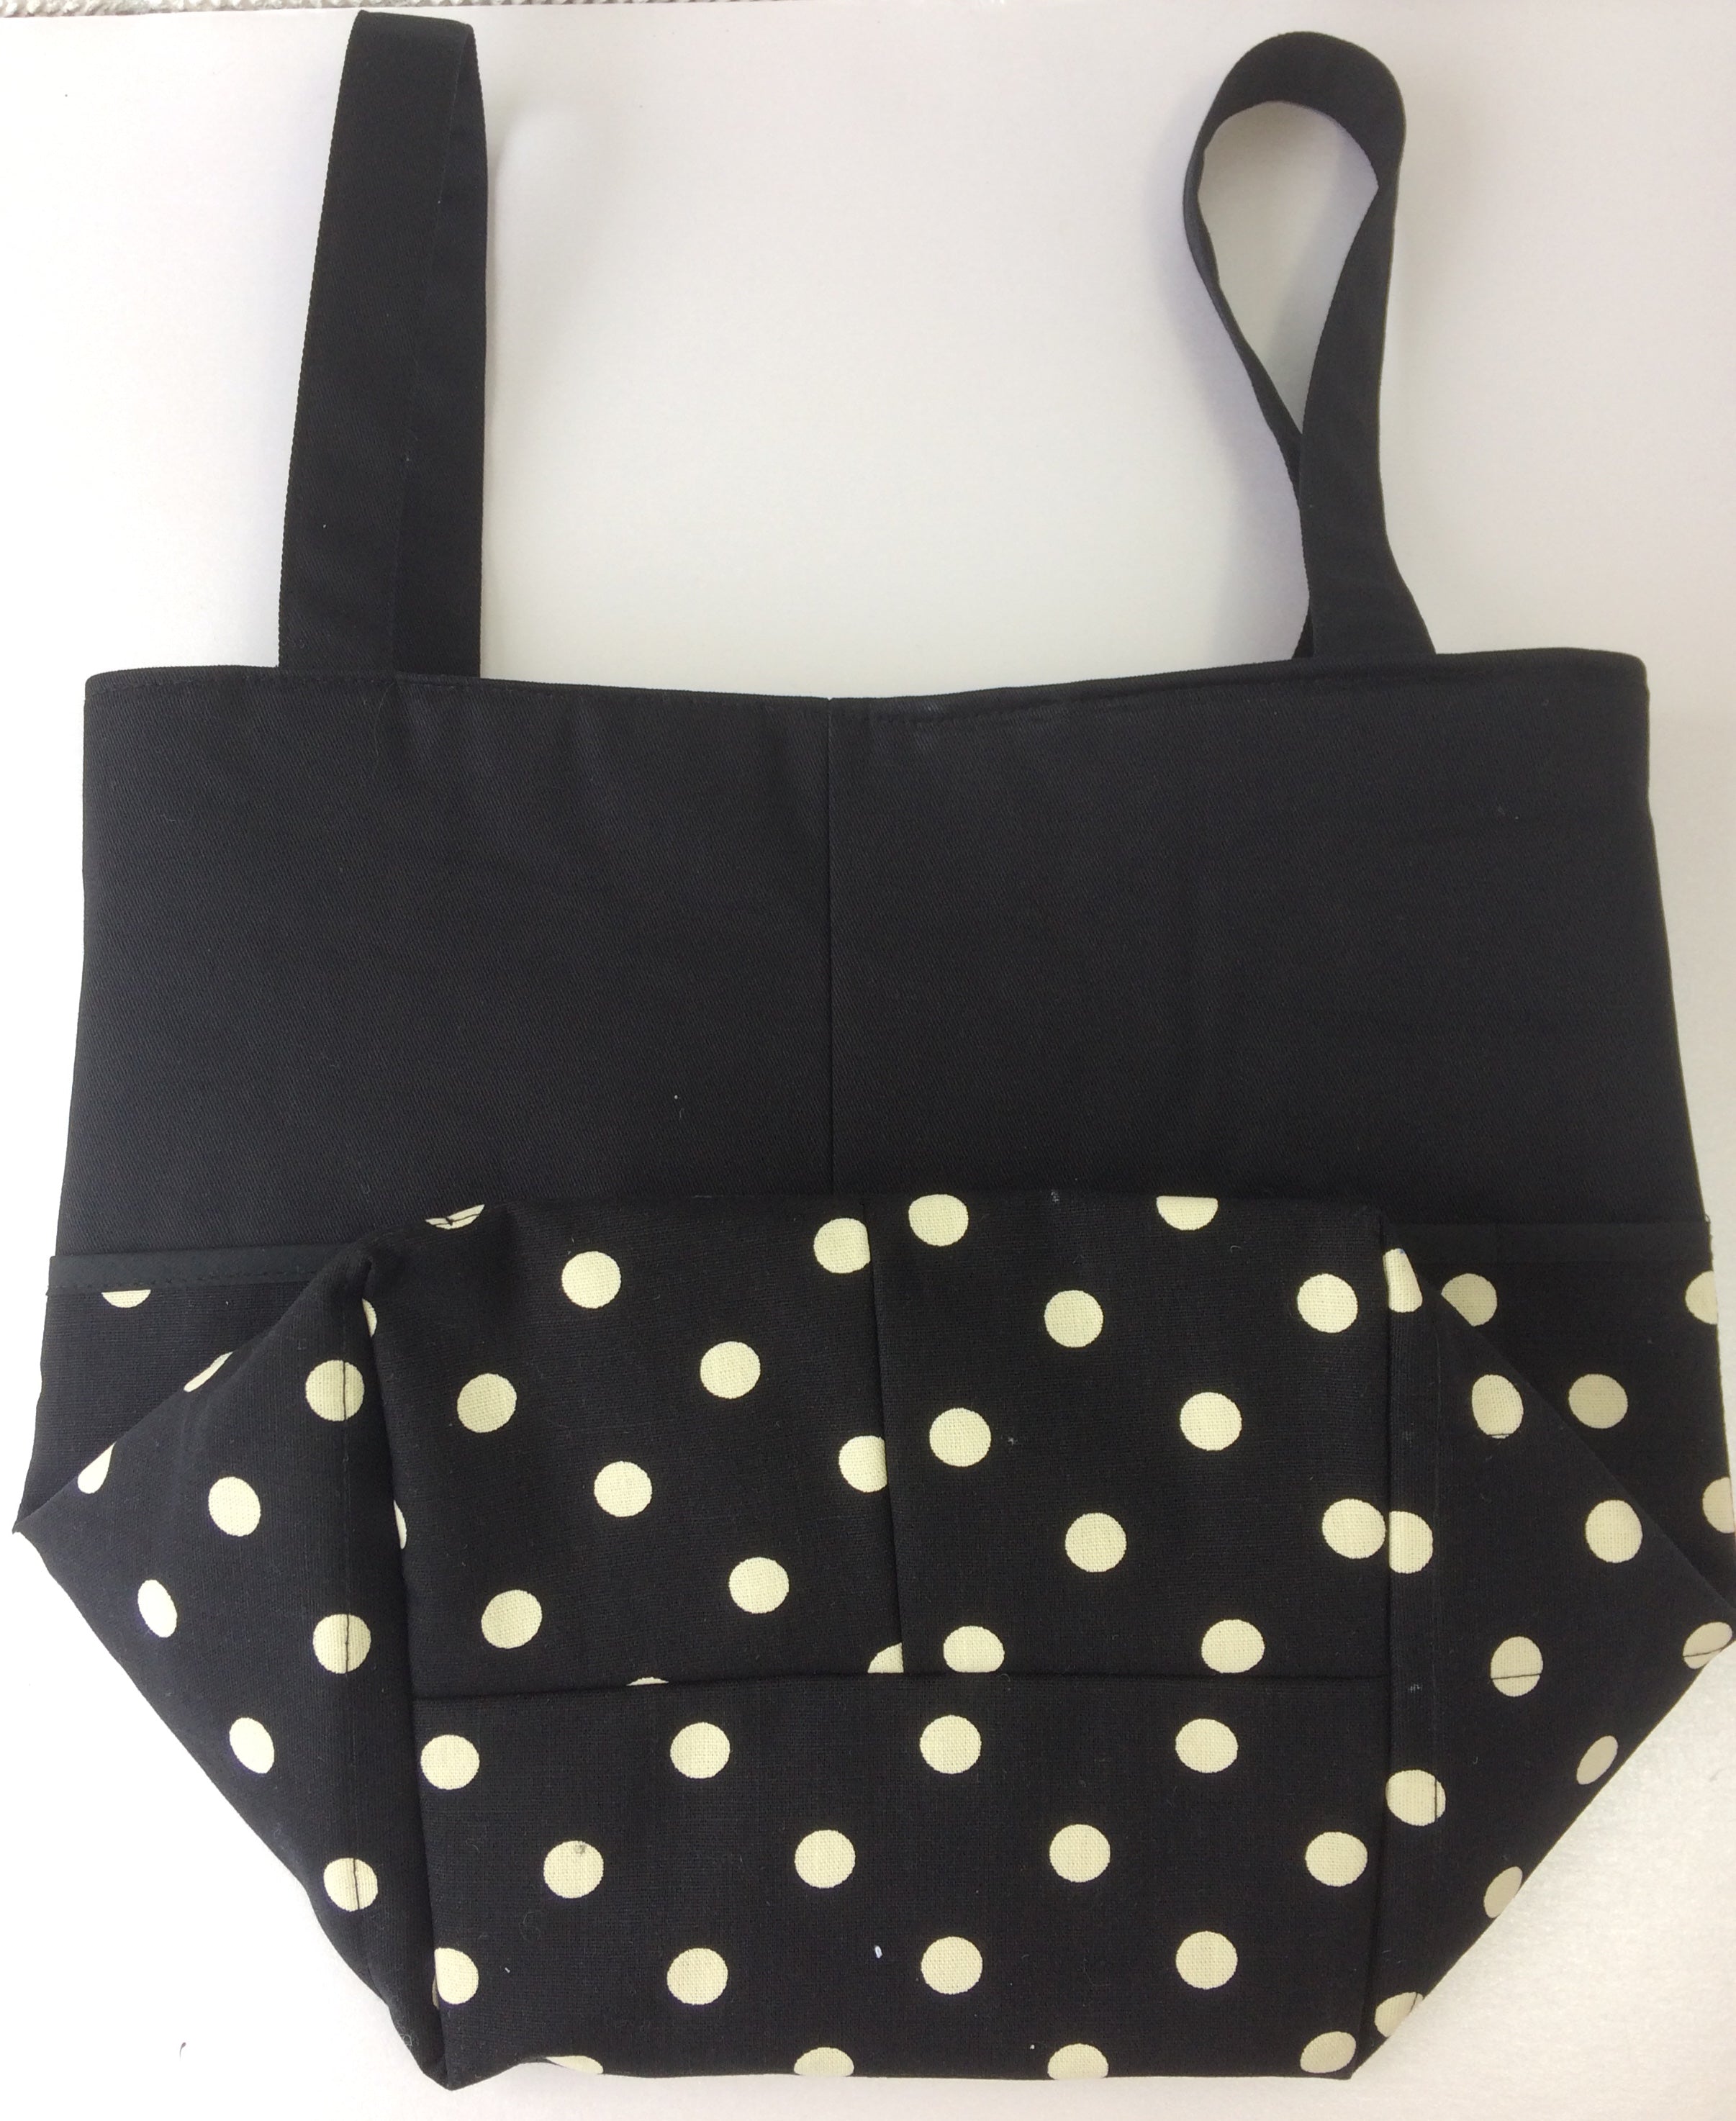 Knitting bag made with black spotted canvas